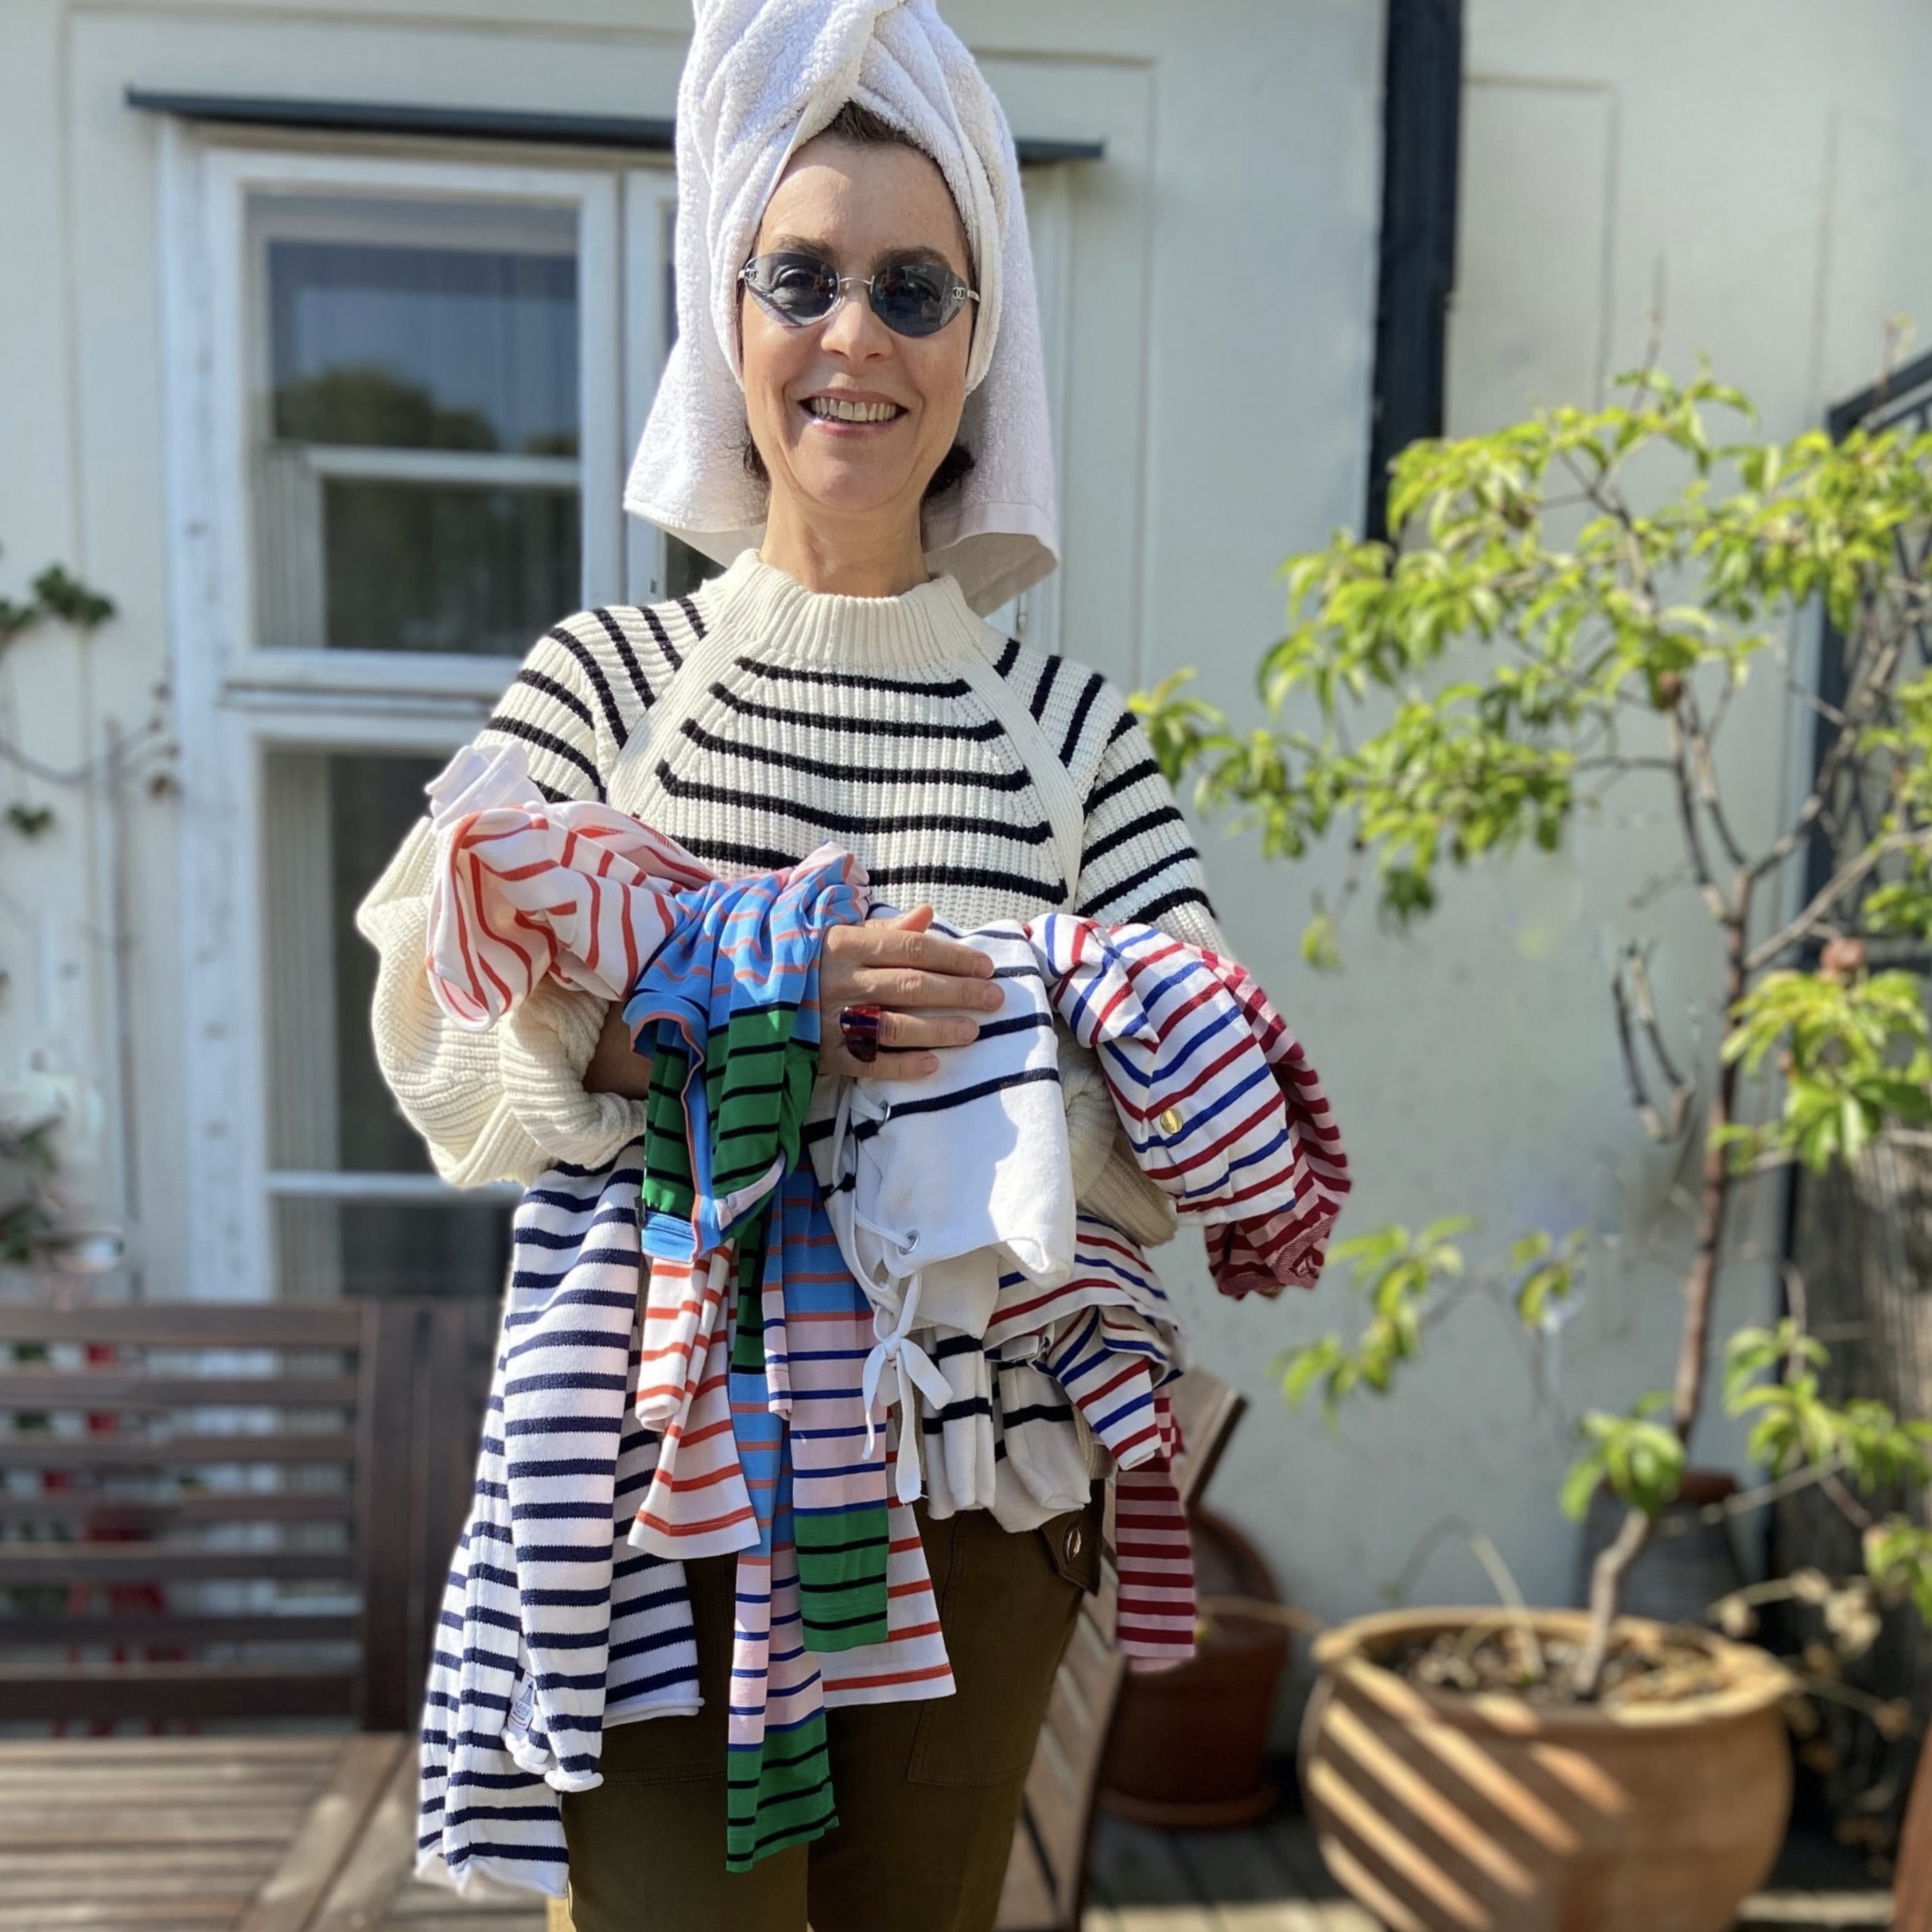 Selma schönburg, editor-in-chief of Notorious mag wearing striped pullover and holding many striped t-shirts